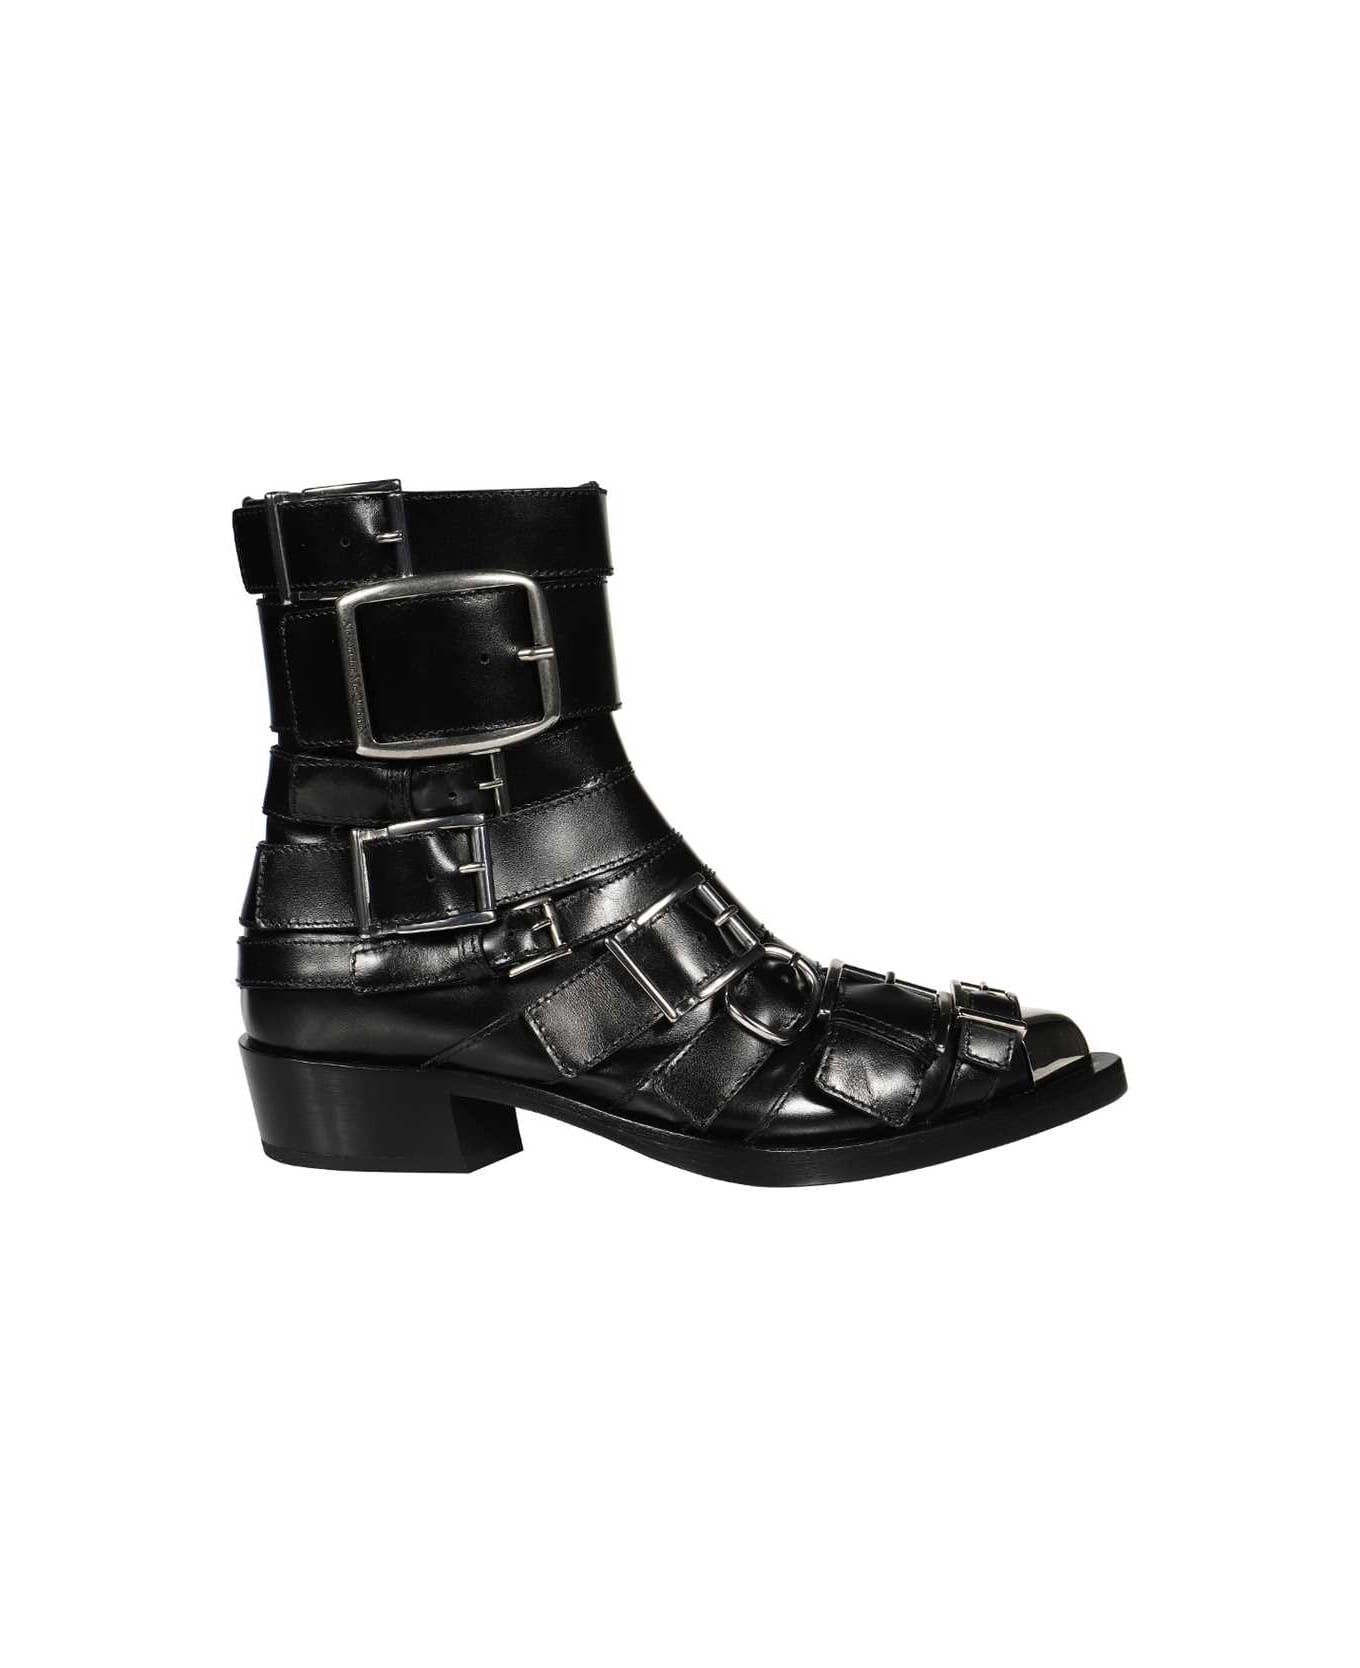 Alexander McQueen Leather Ankle Boots - black